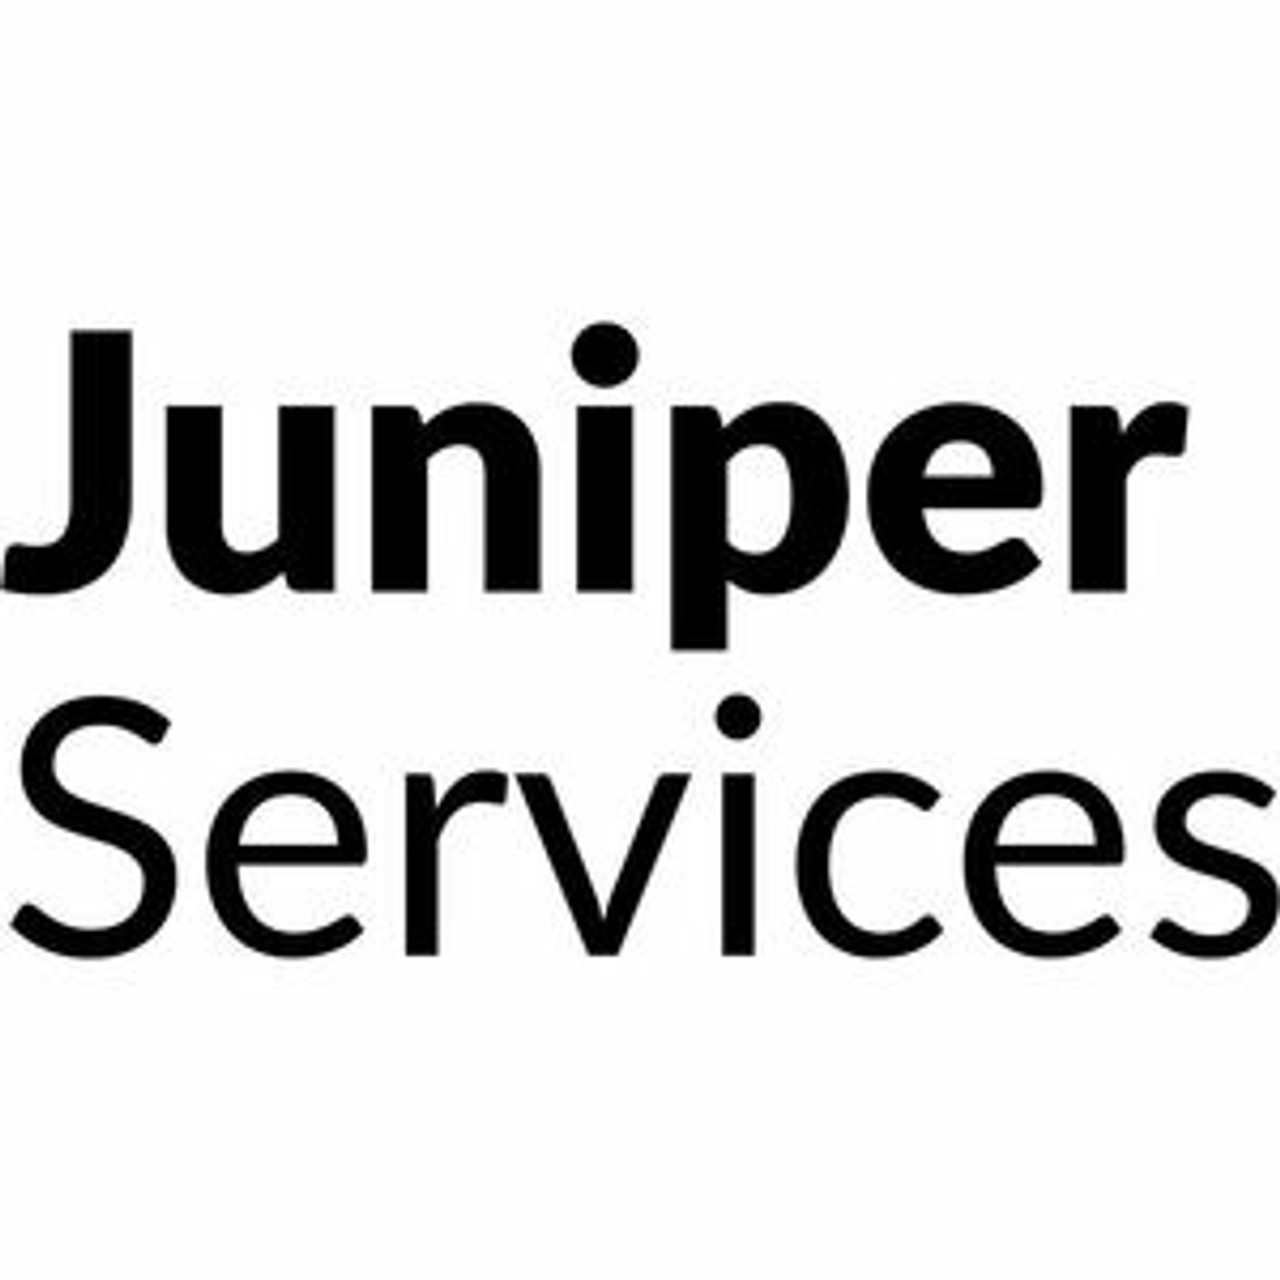 Juniper 5 Year Subscription for Sky Advanced Threat Prevention on vSRX 100Mbps